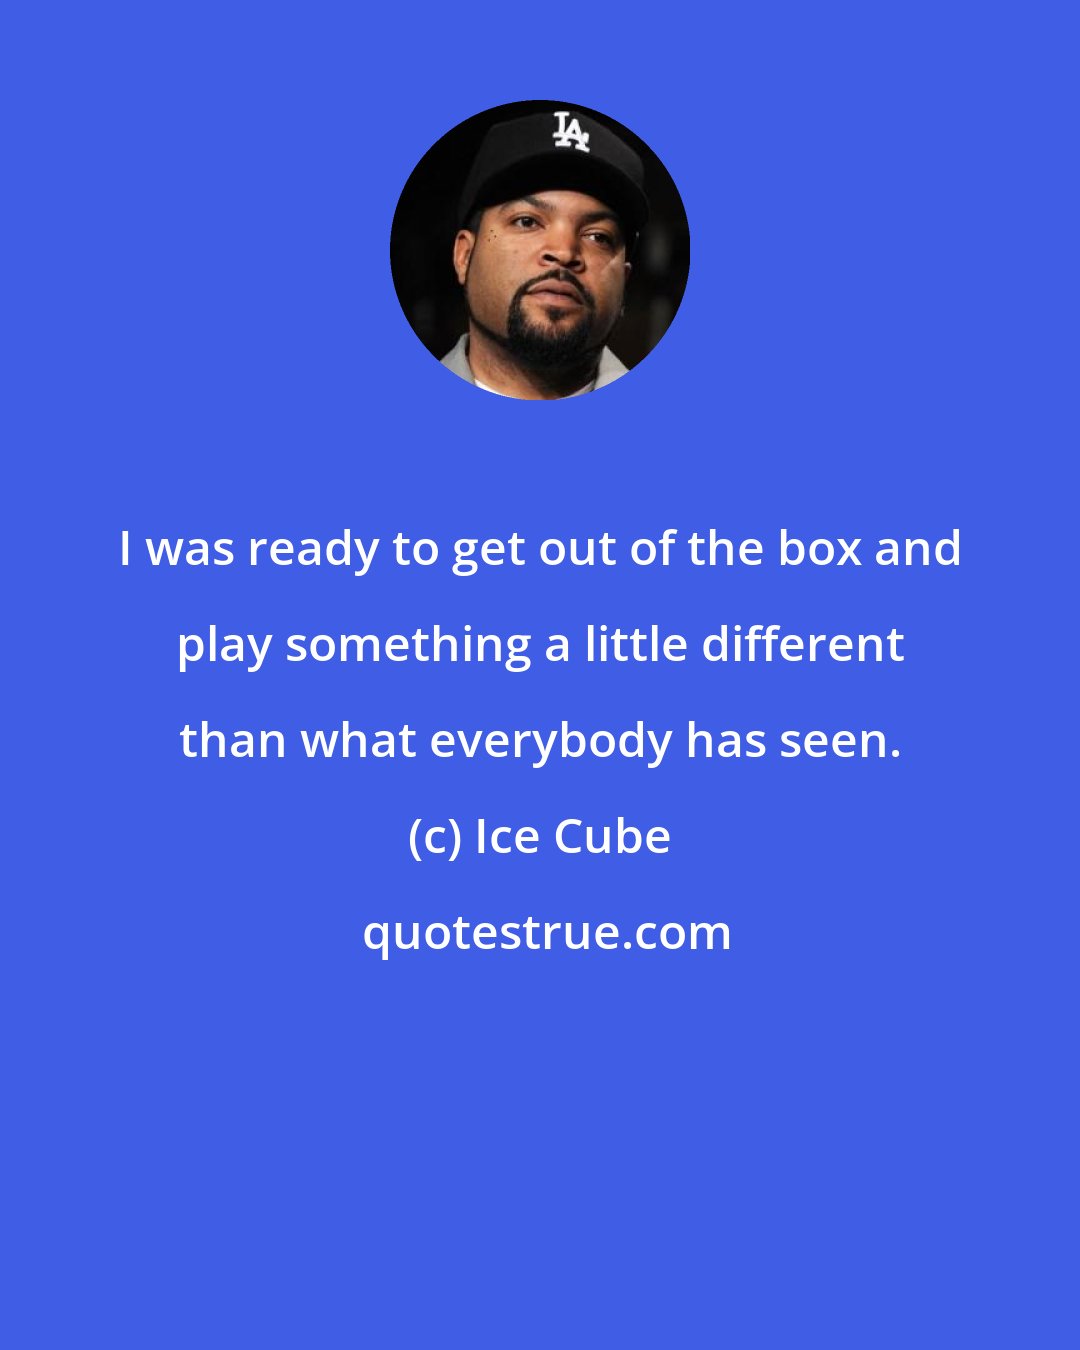 Ice Cube: I was ready to get out of the box and play something a little different than what everybody has seen.